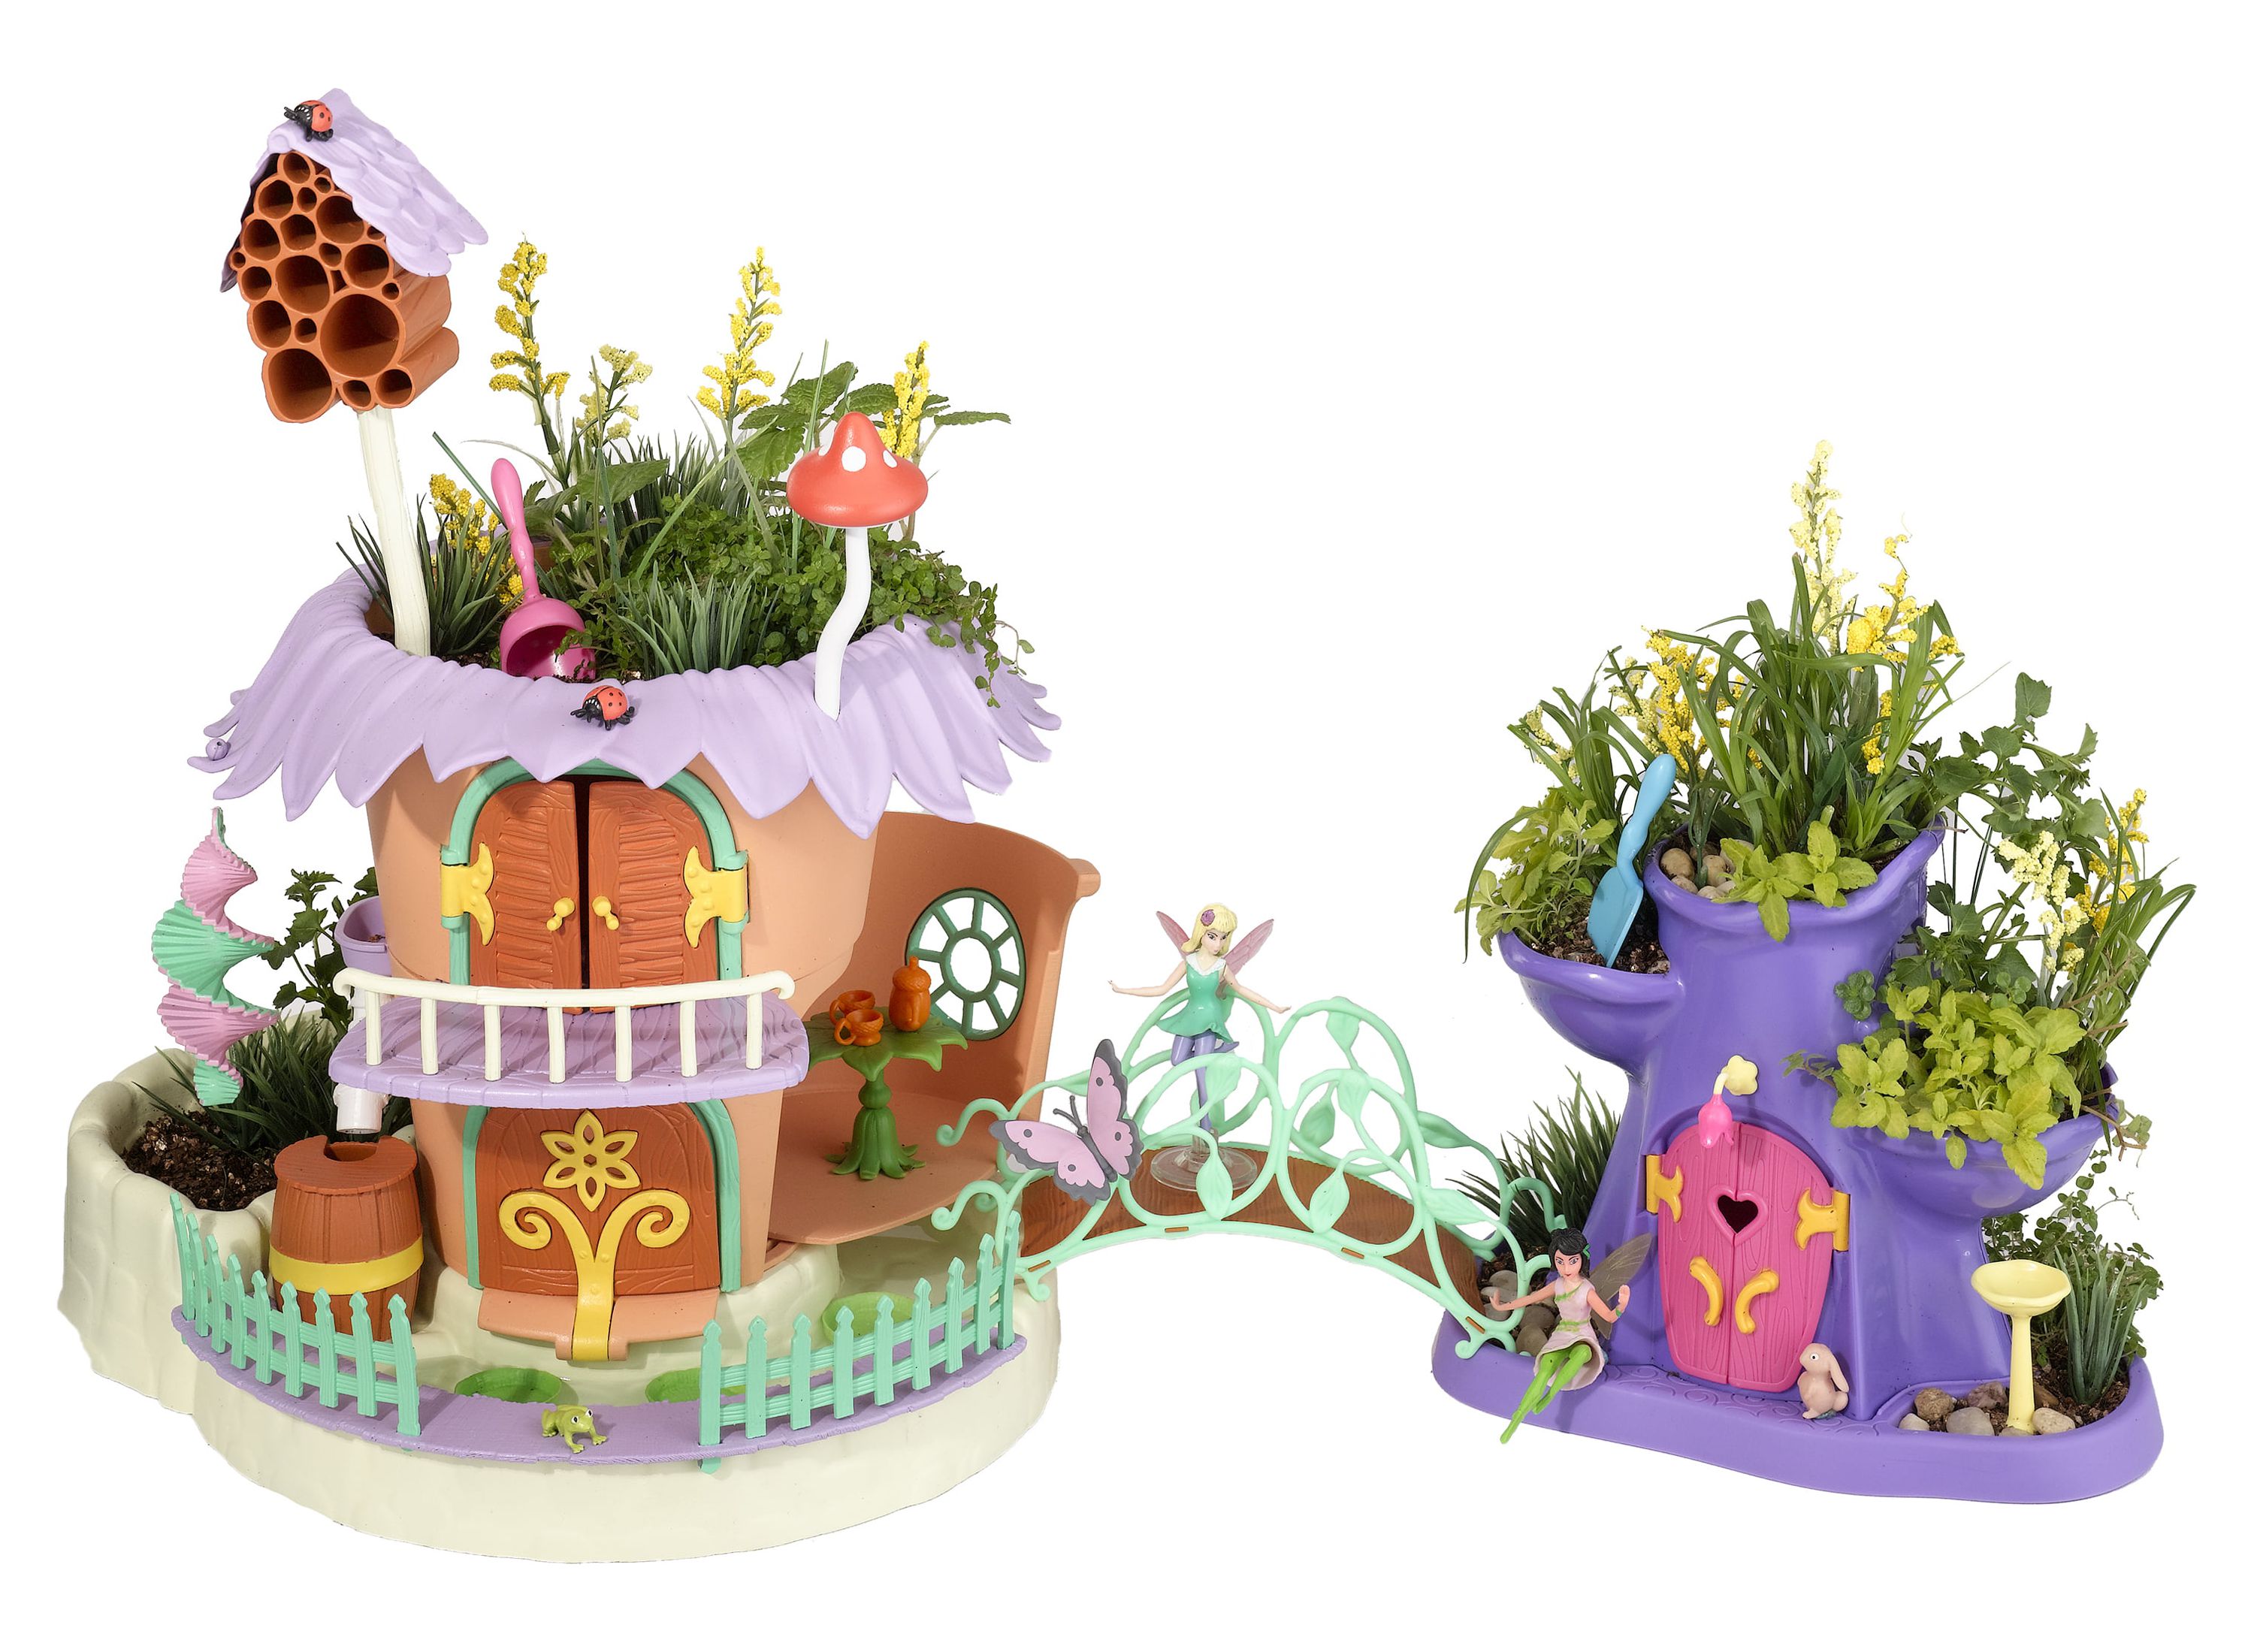 My Fairy Garden, Nature Cottage - image 5 of 12